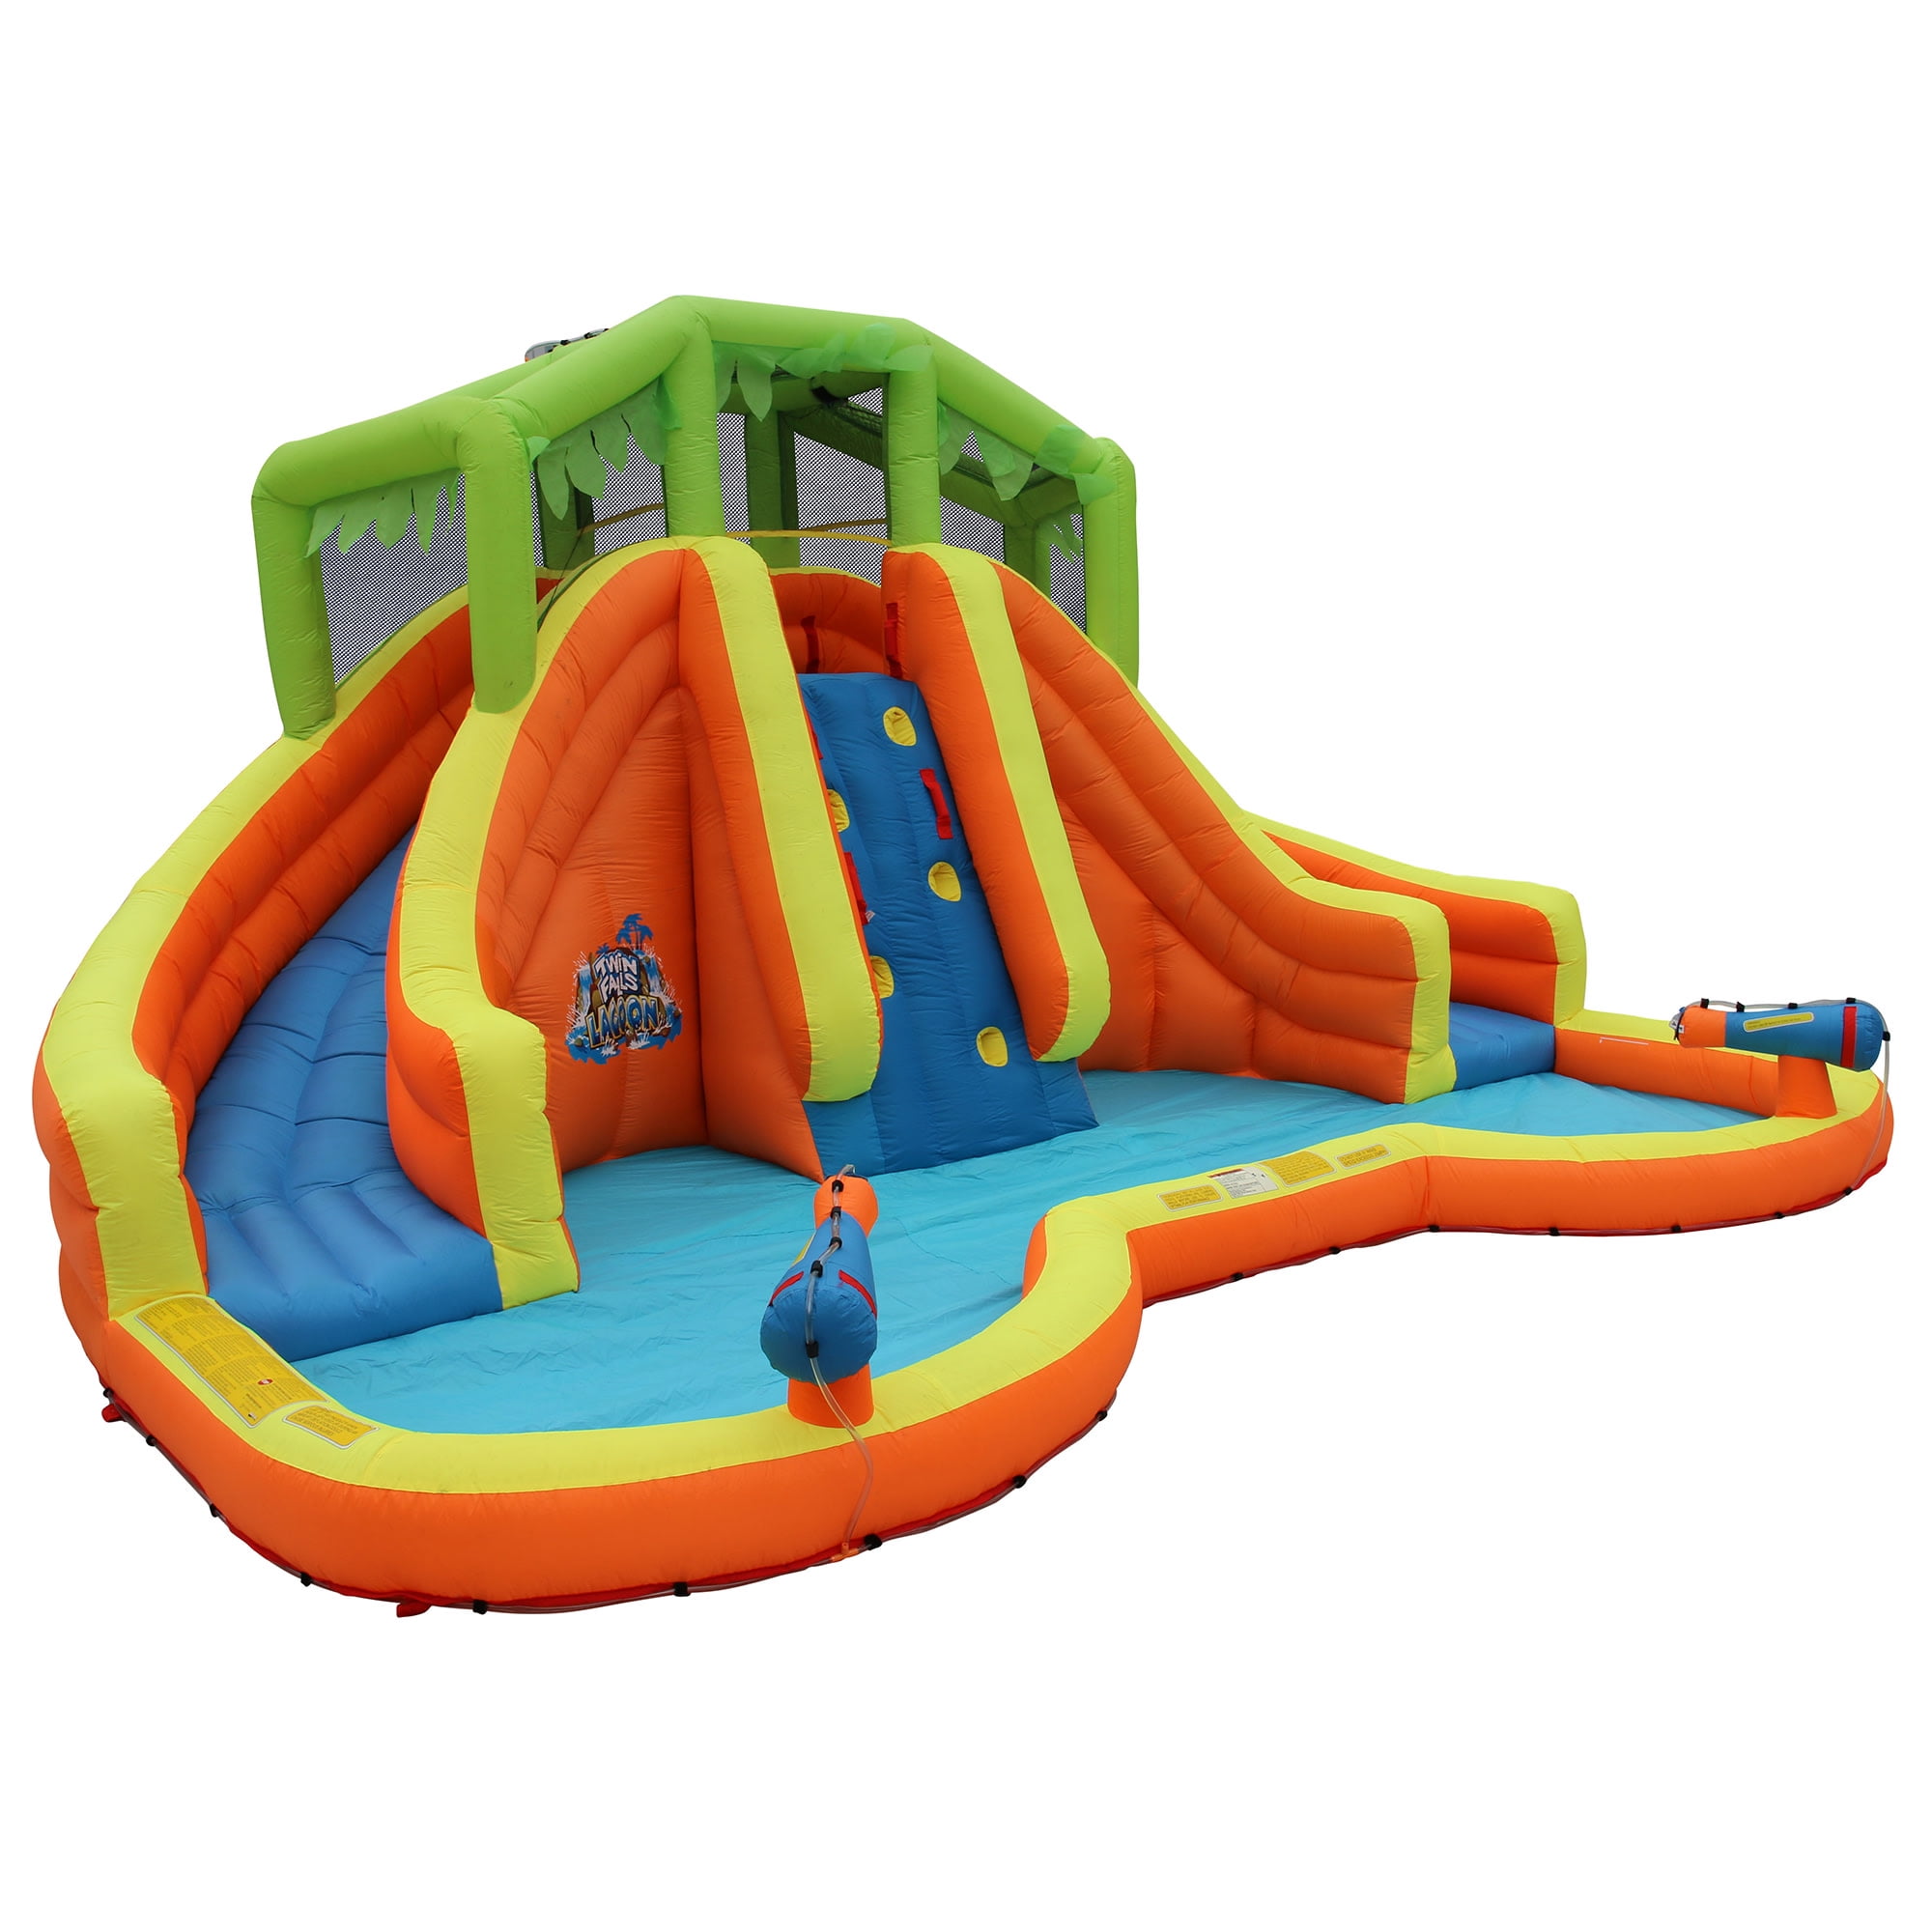 9 a water slide for children with picture Children's Slide 100% made in UE 